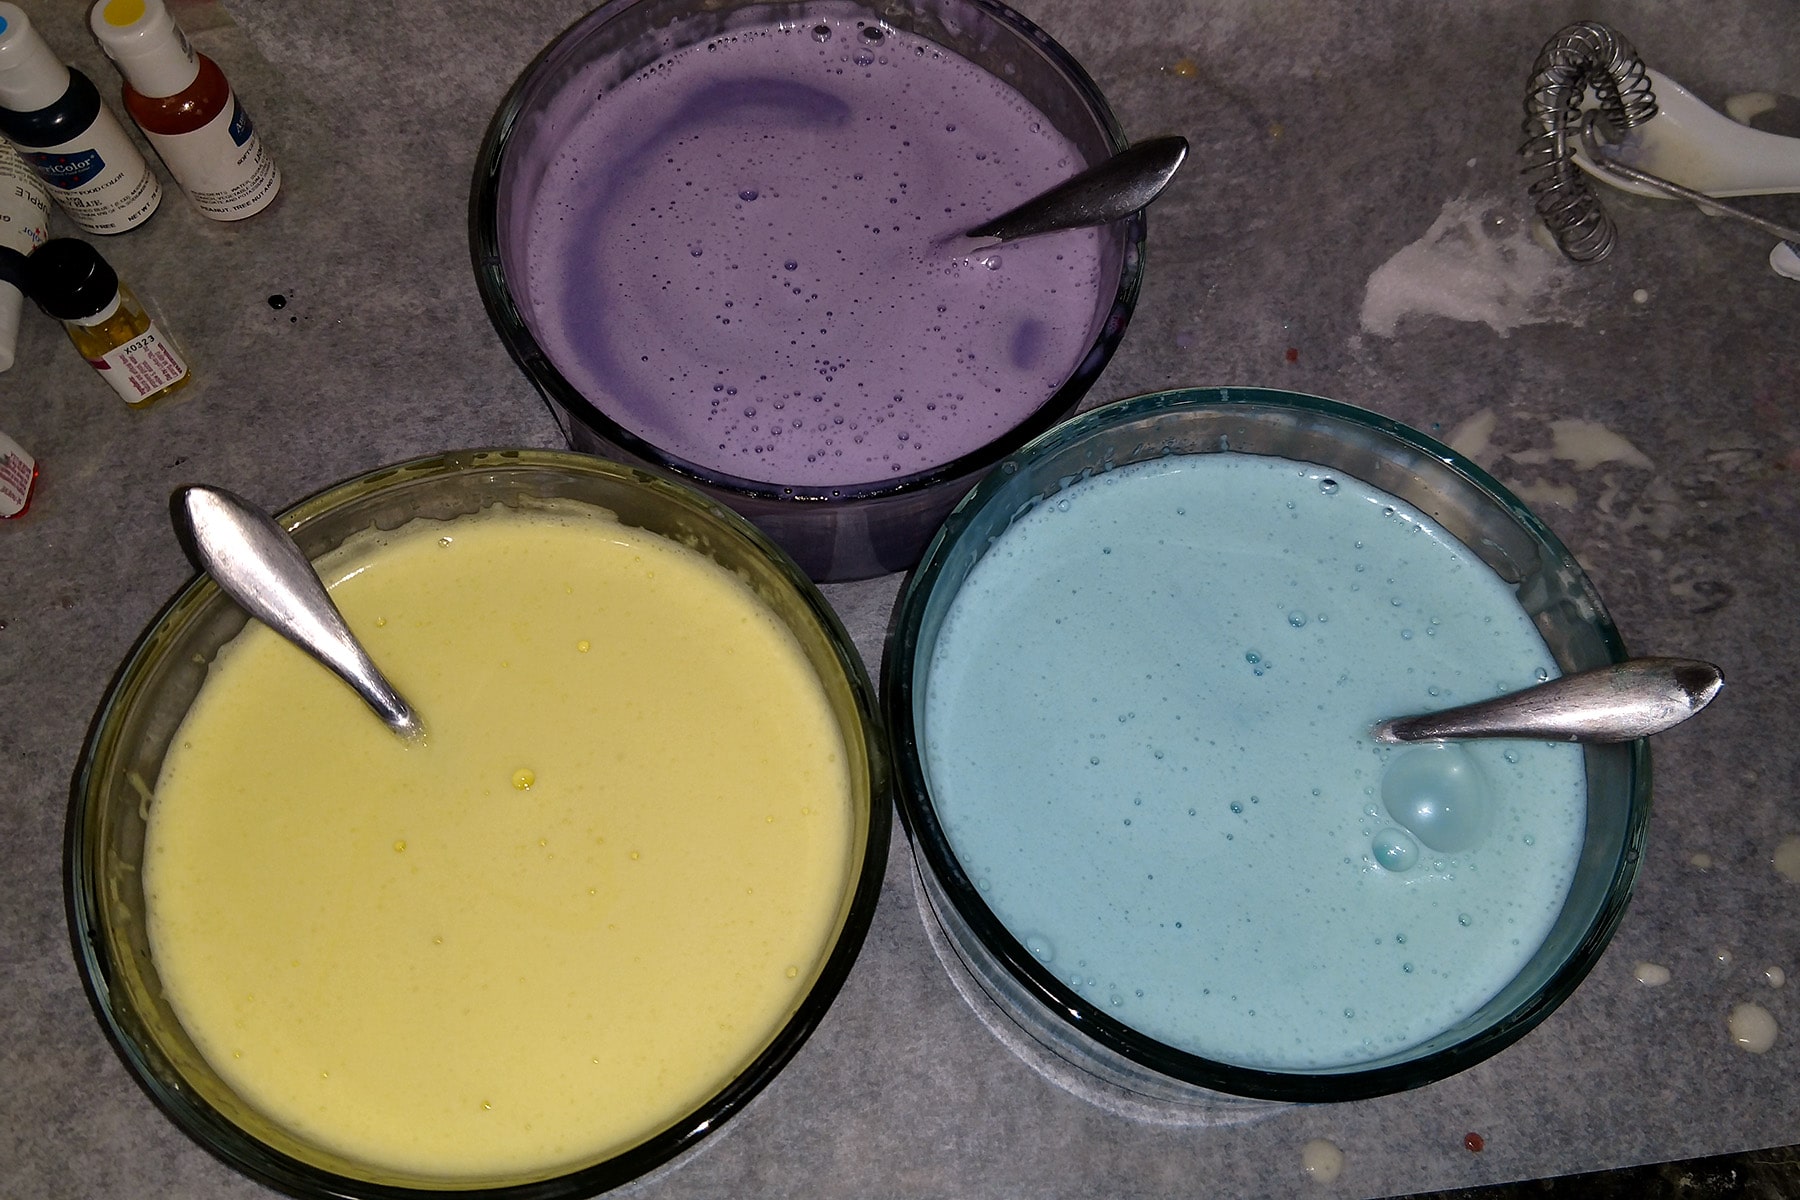 2 small glass mixing bowls with milky liquid in each. One is yellow, another is sky blue, and the last is purple.